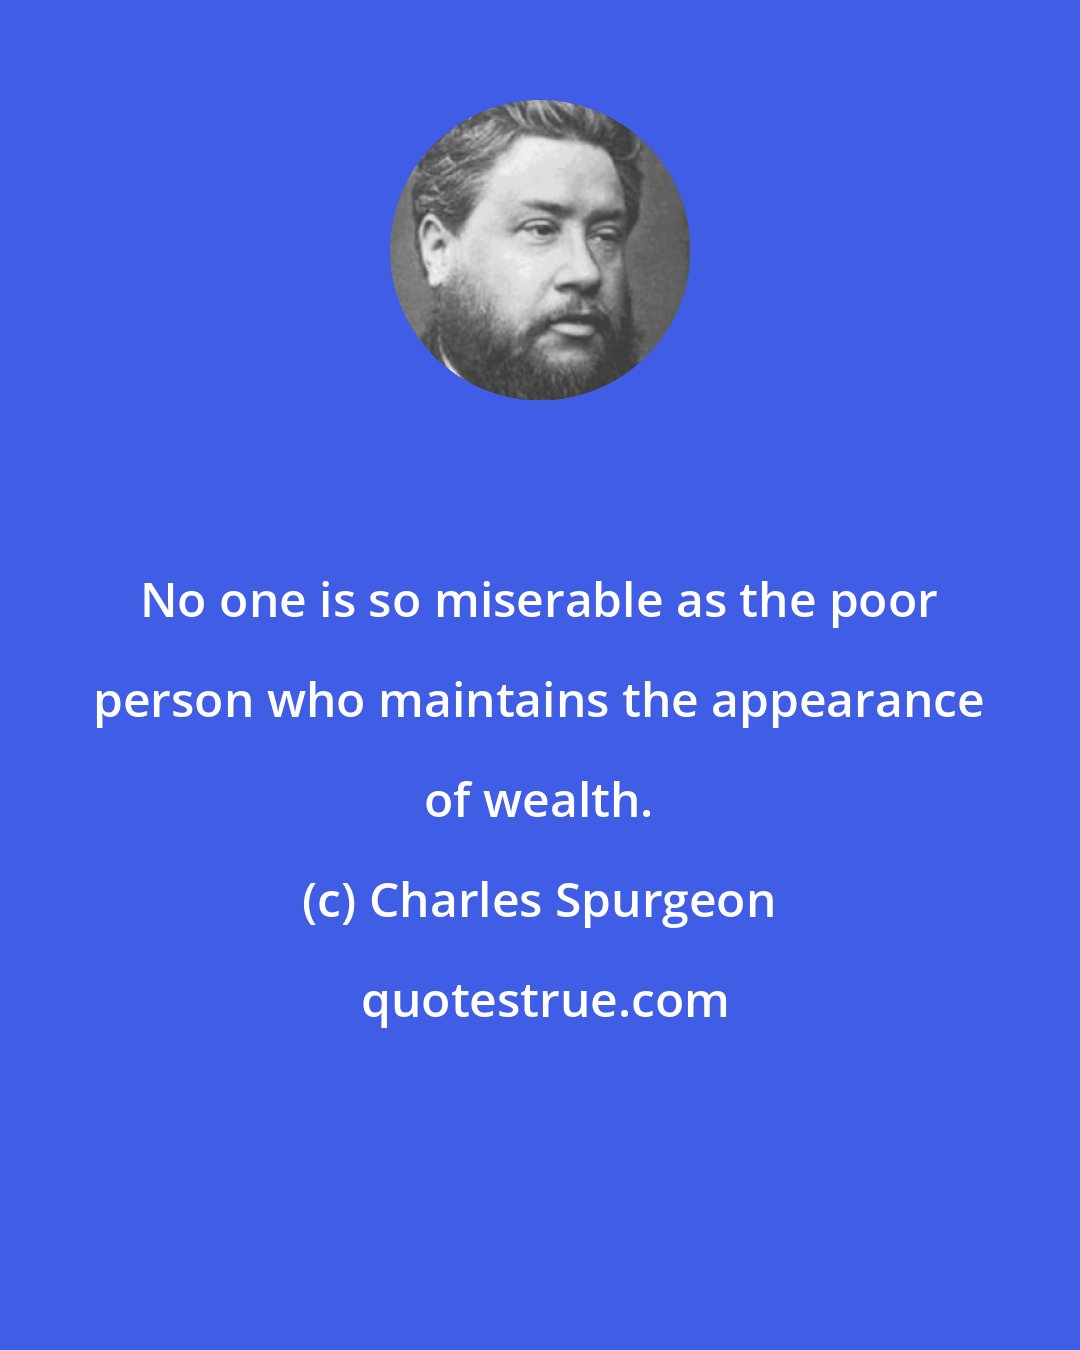 Charles Spurgeon: No one is so miserable as the poor person who maintains the appearance of wealth.